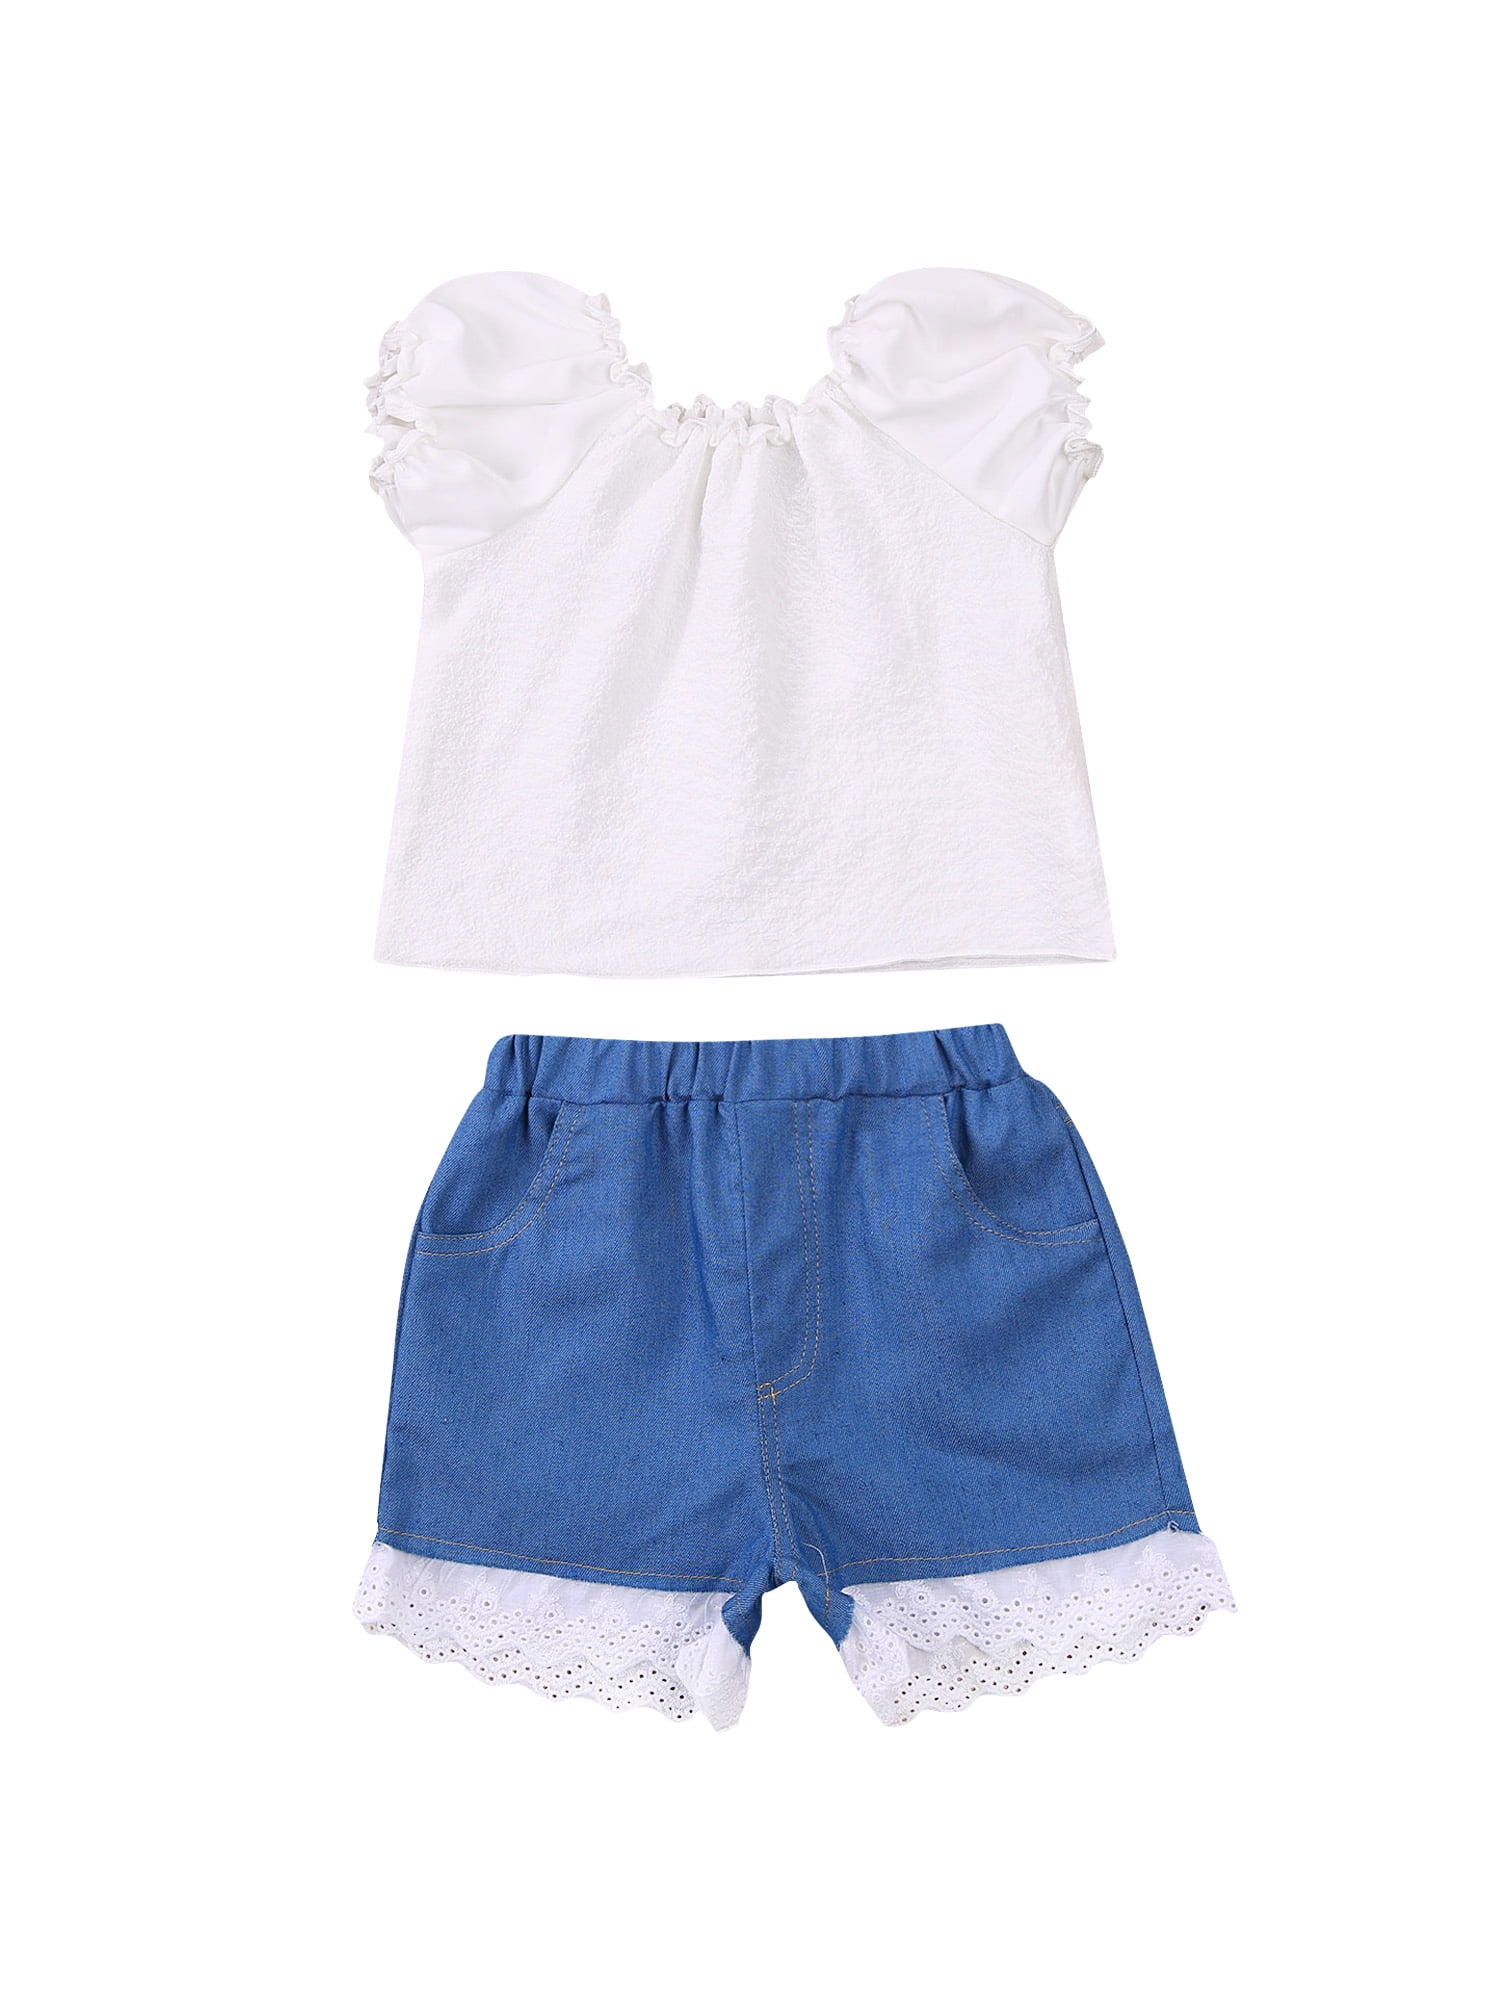 Details about   2pc baby girl clothes summer Tee+shorts kids girls casual outfits US SELLER 